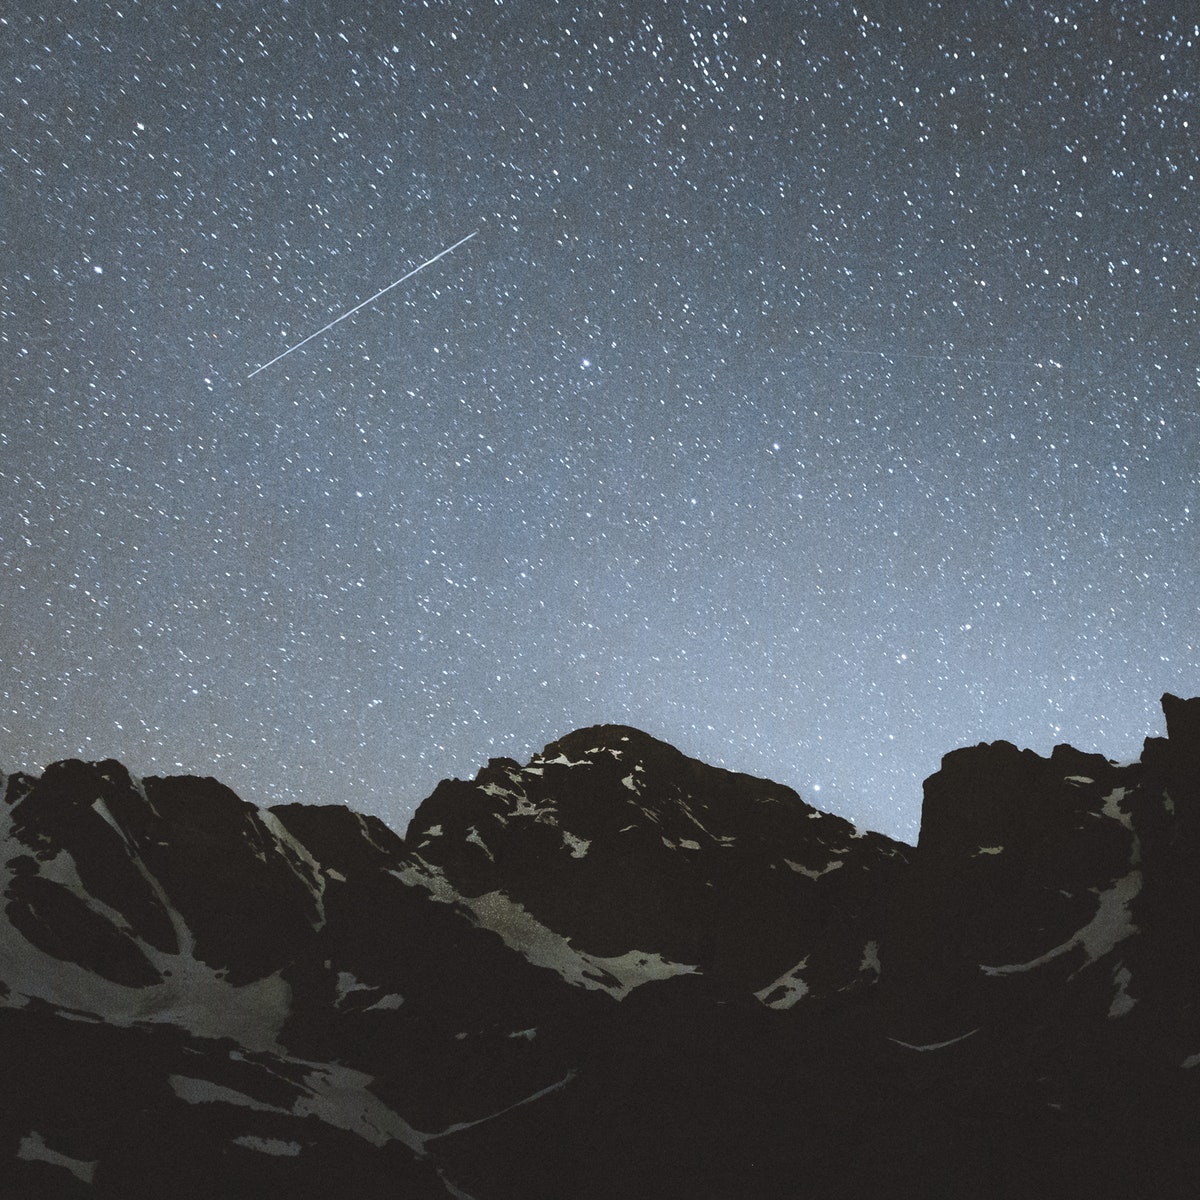 Mountain range with starry sky over it.